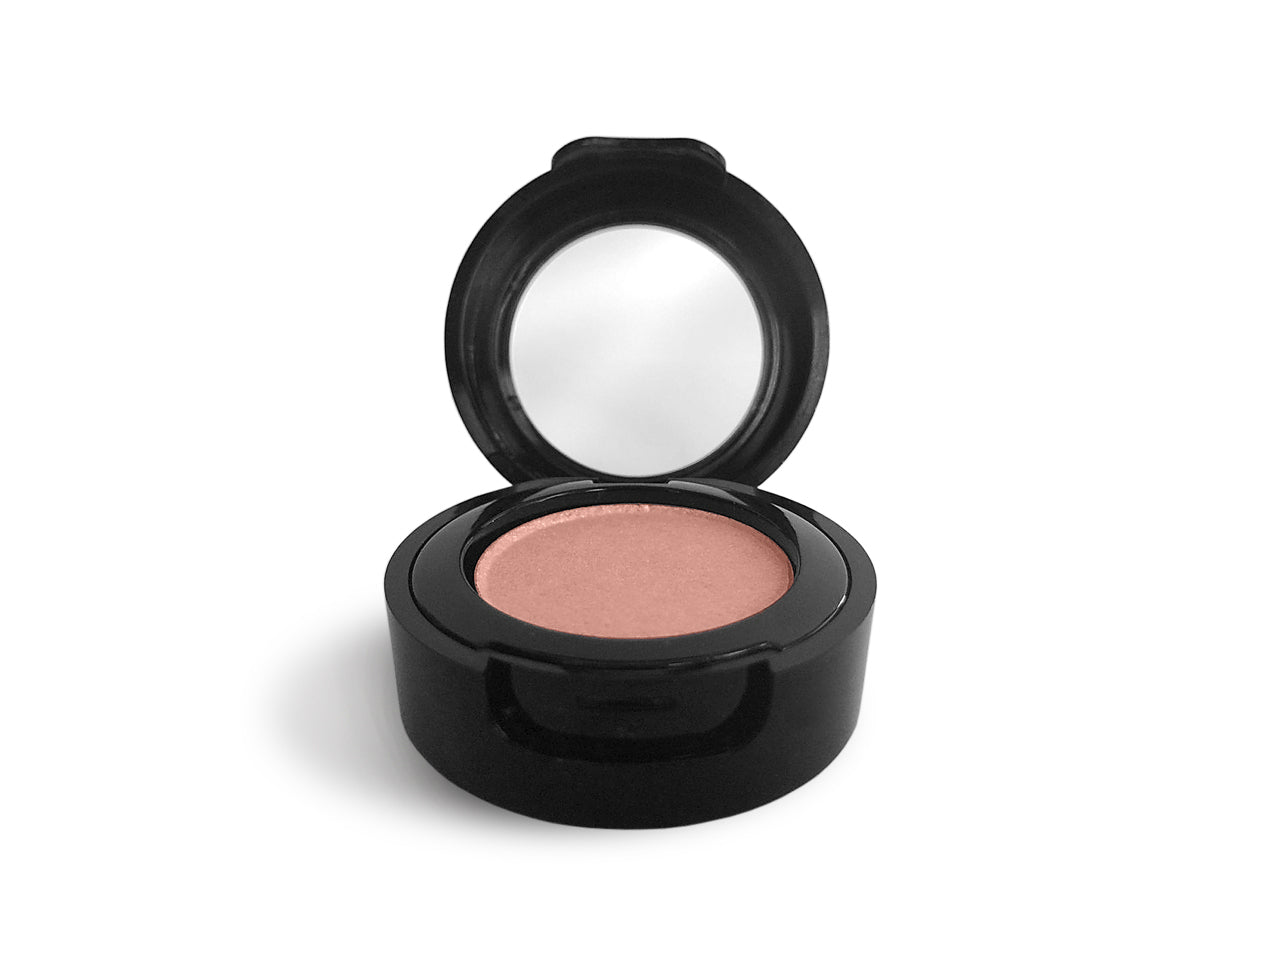 Organic Vegan Cruelty-Free Eyeshadow - Peach - Roses & Chains | Fashionable Clothing, Shoes, Accessories, & More